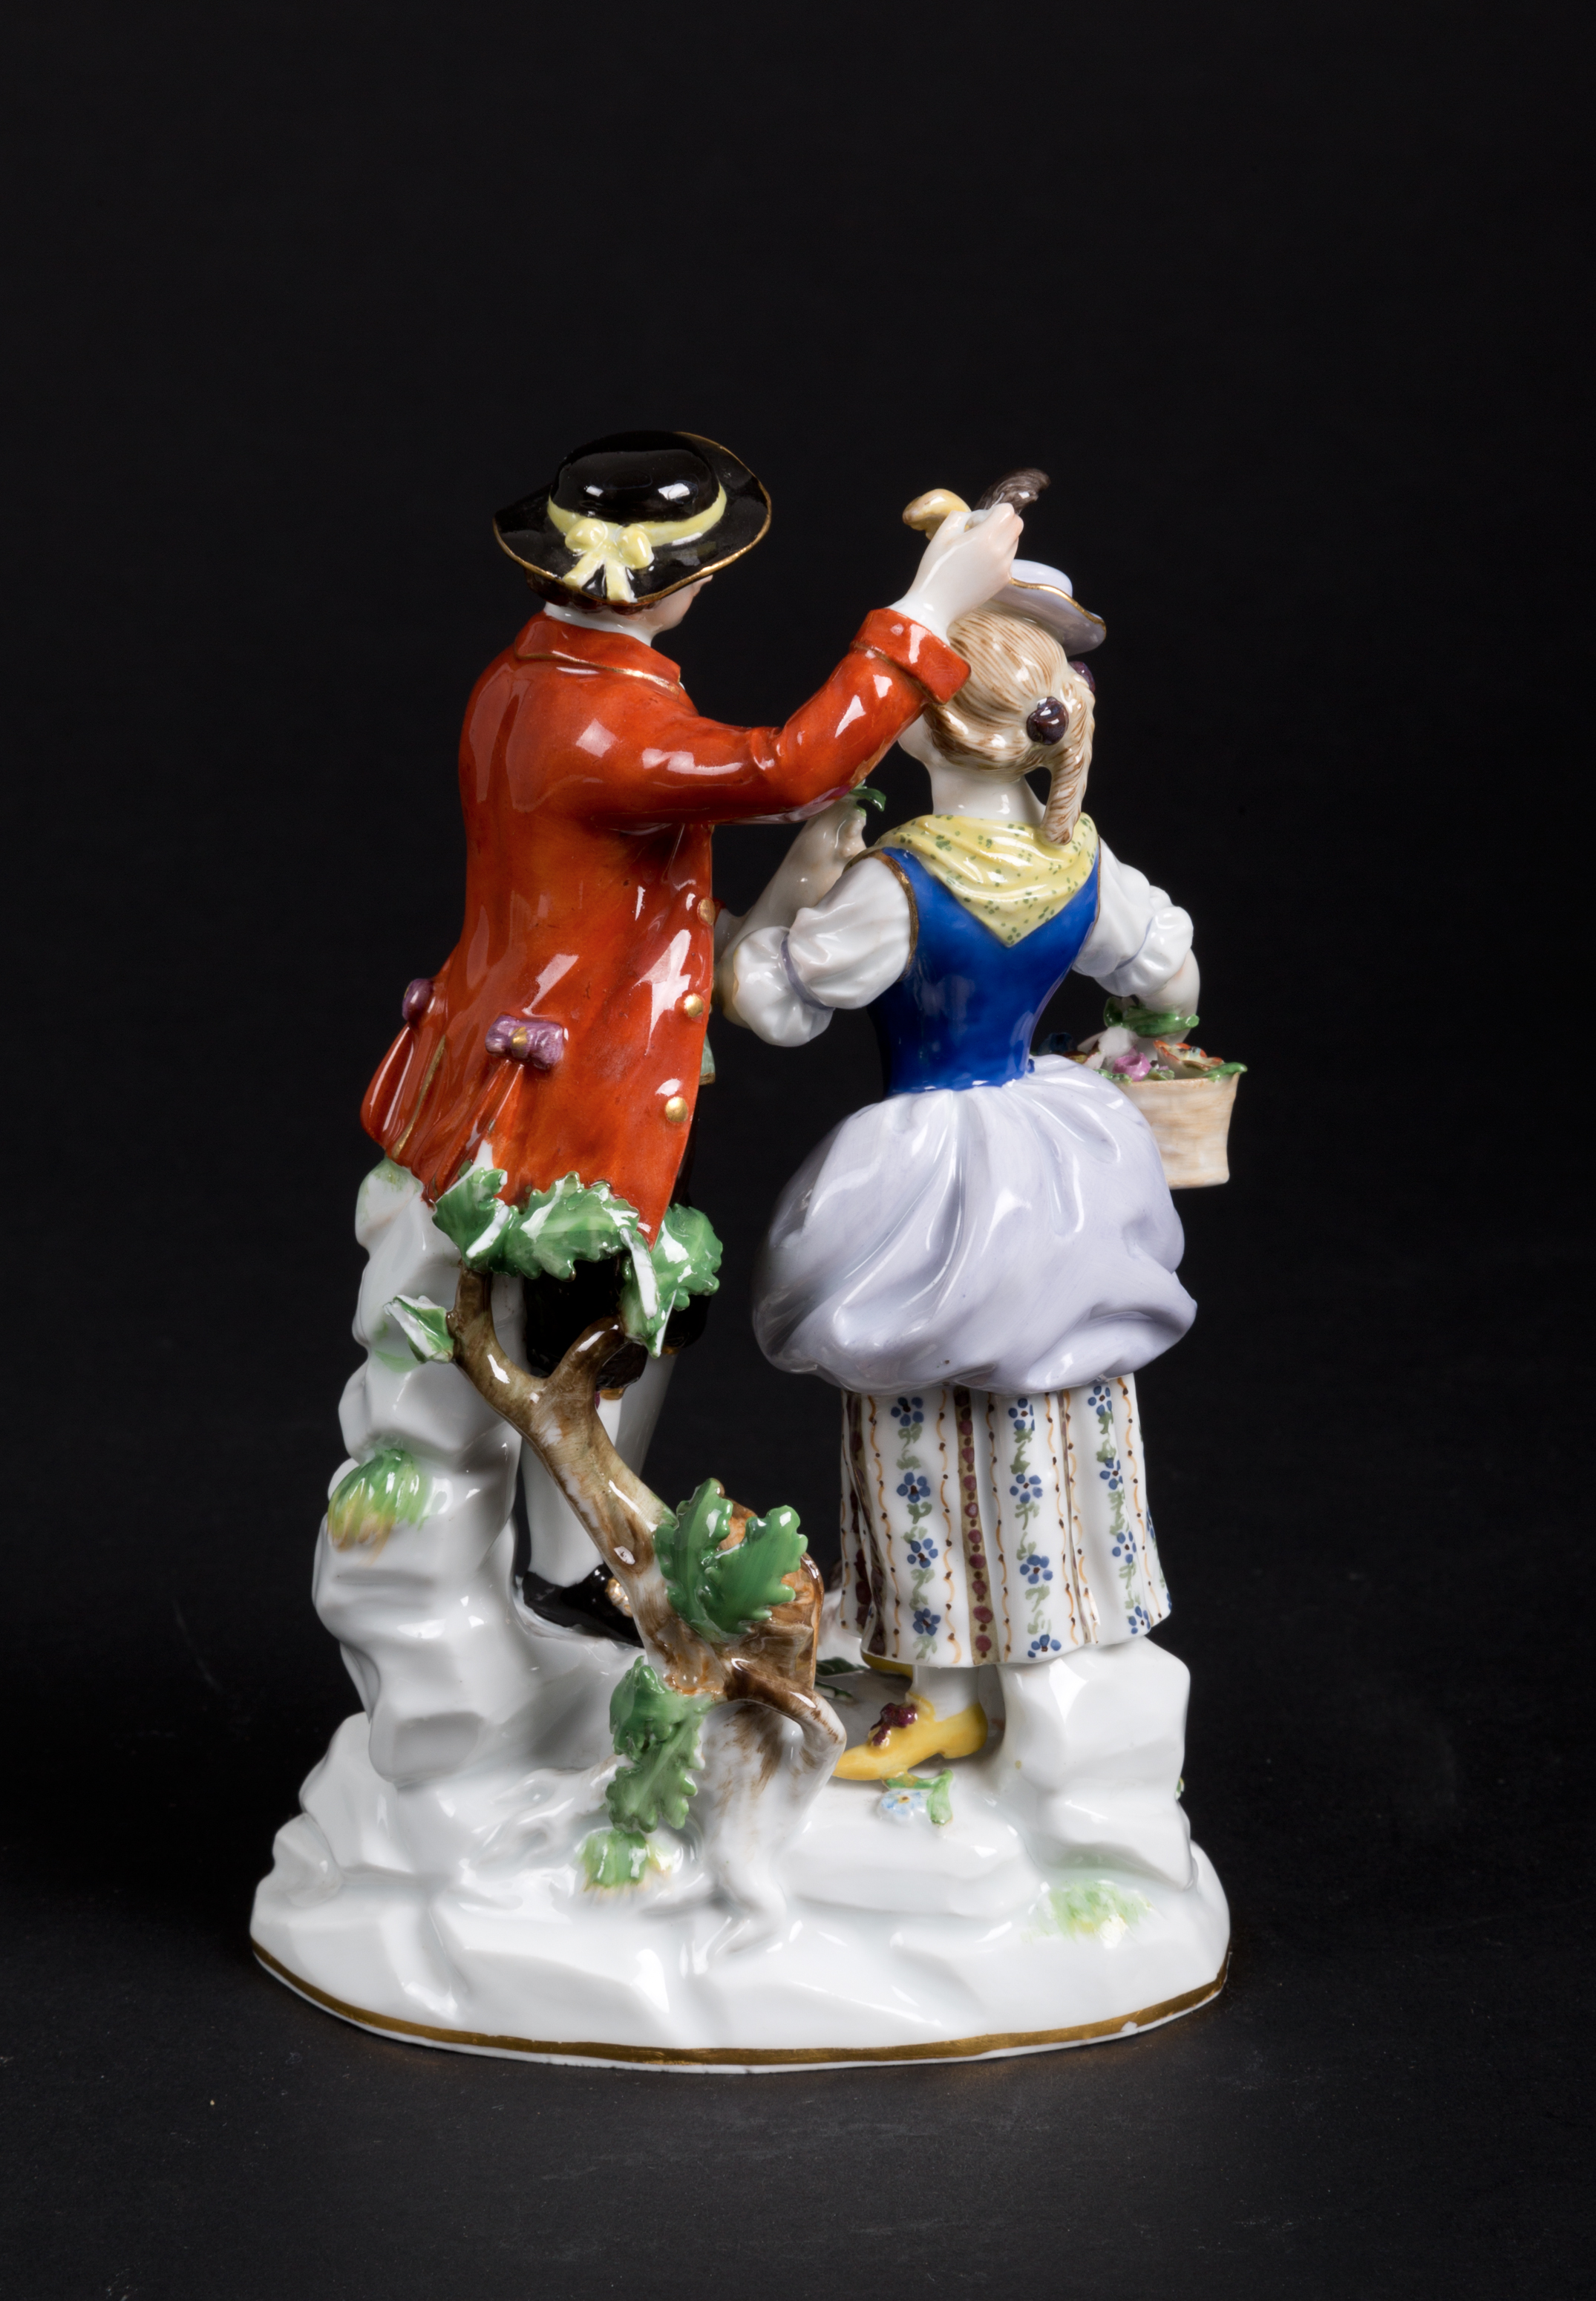 Meissen porcelain figurine. Late 18th-early 19th ce. - Image 3 of 5